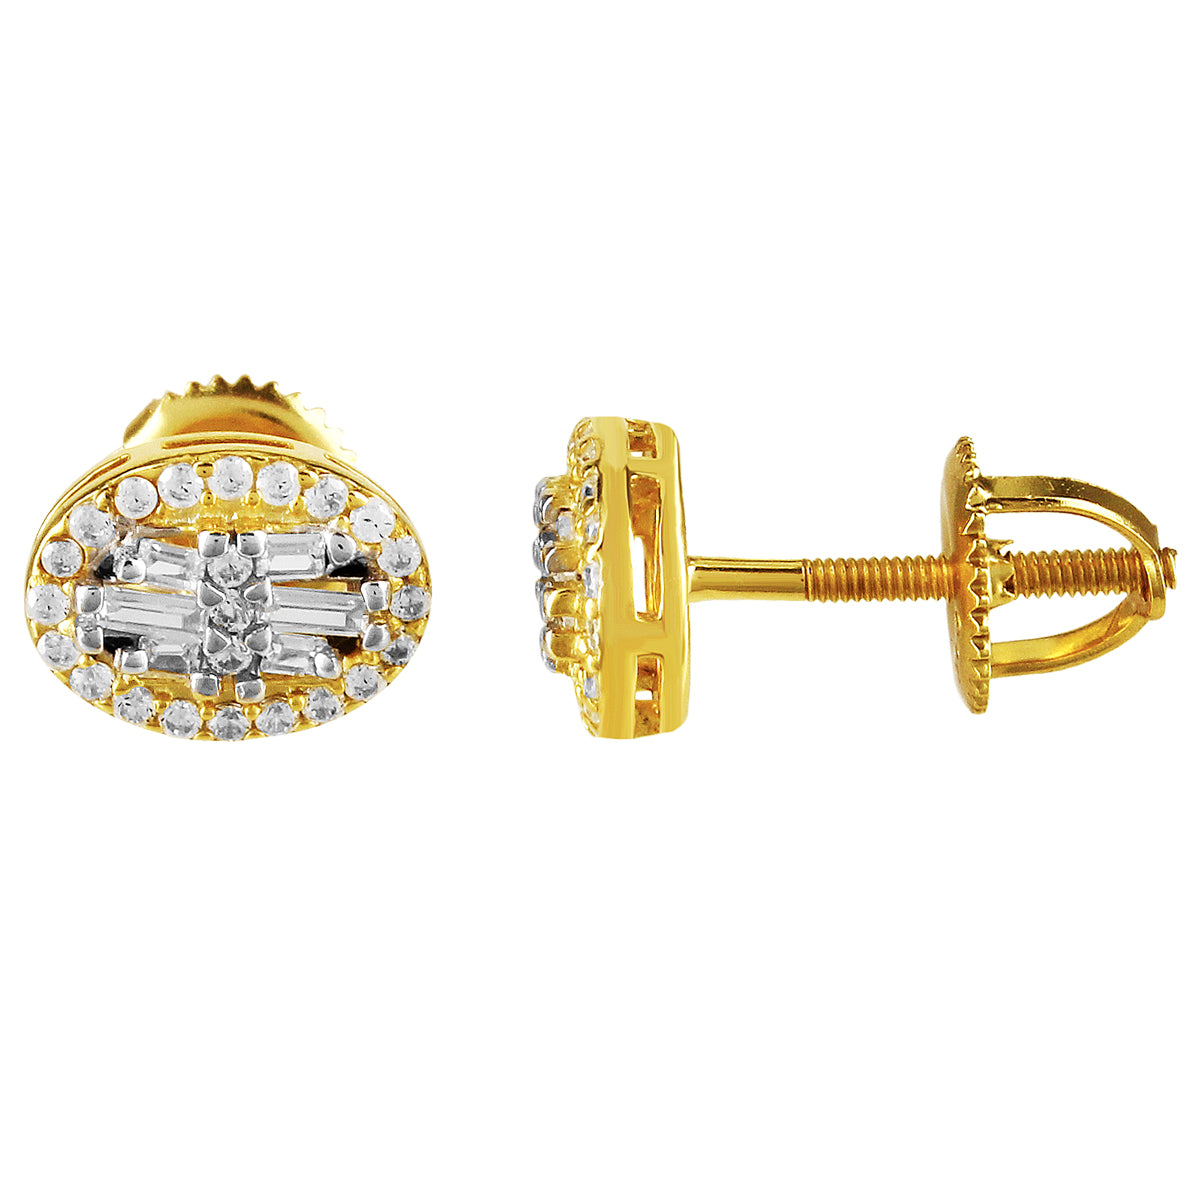 Gold Tone Oval Shape Baguette Icy Stud Solitaire Earring